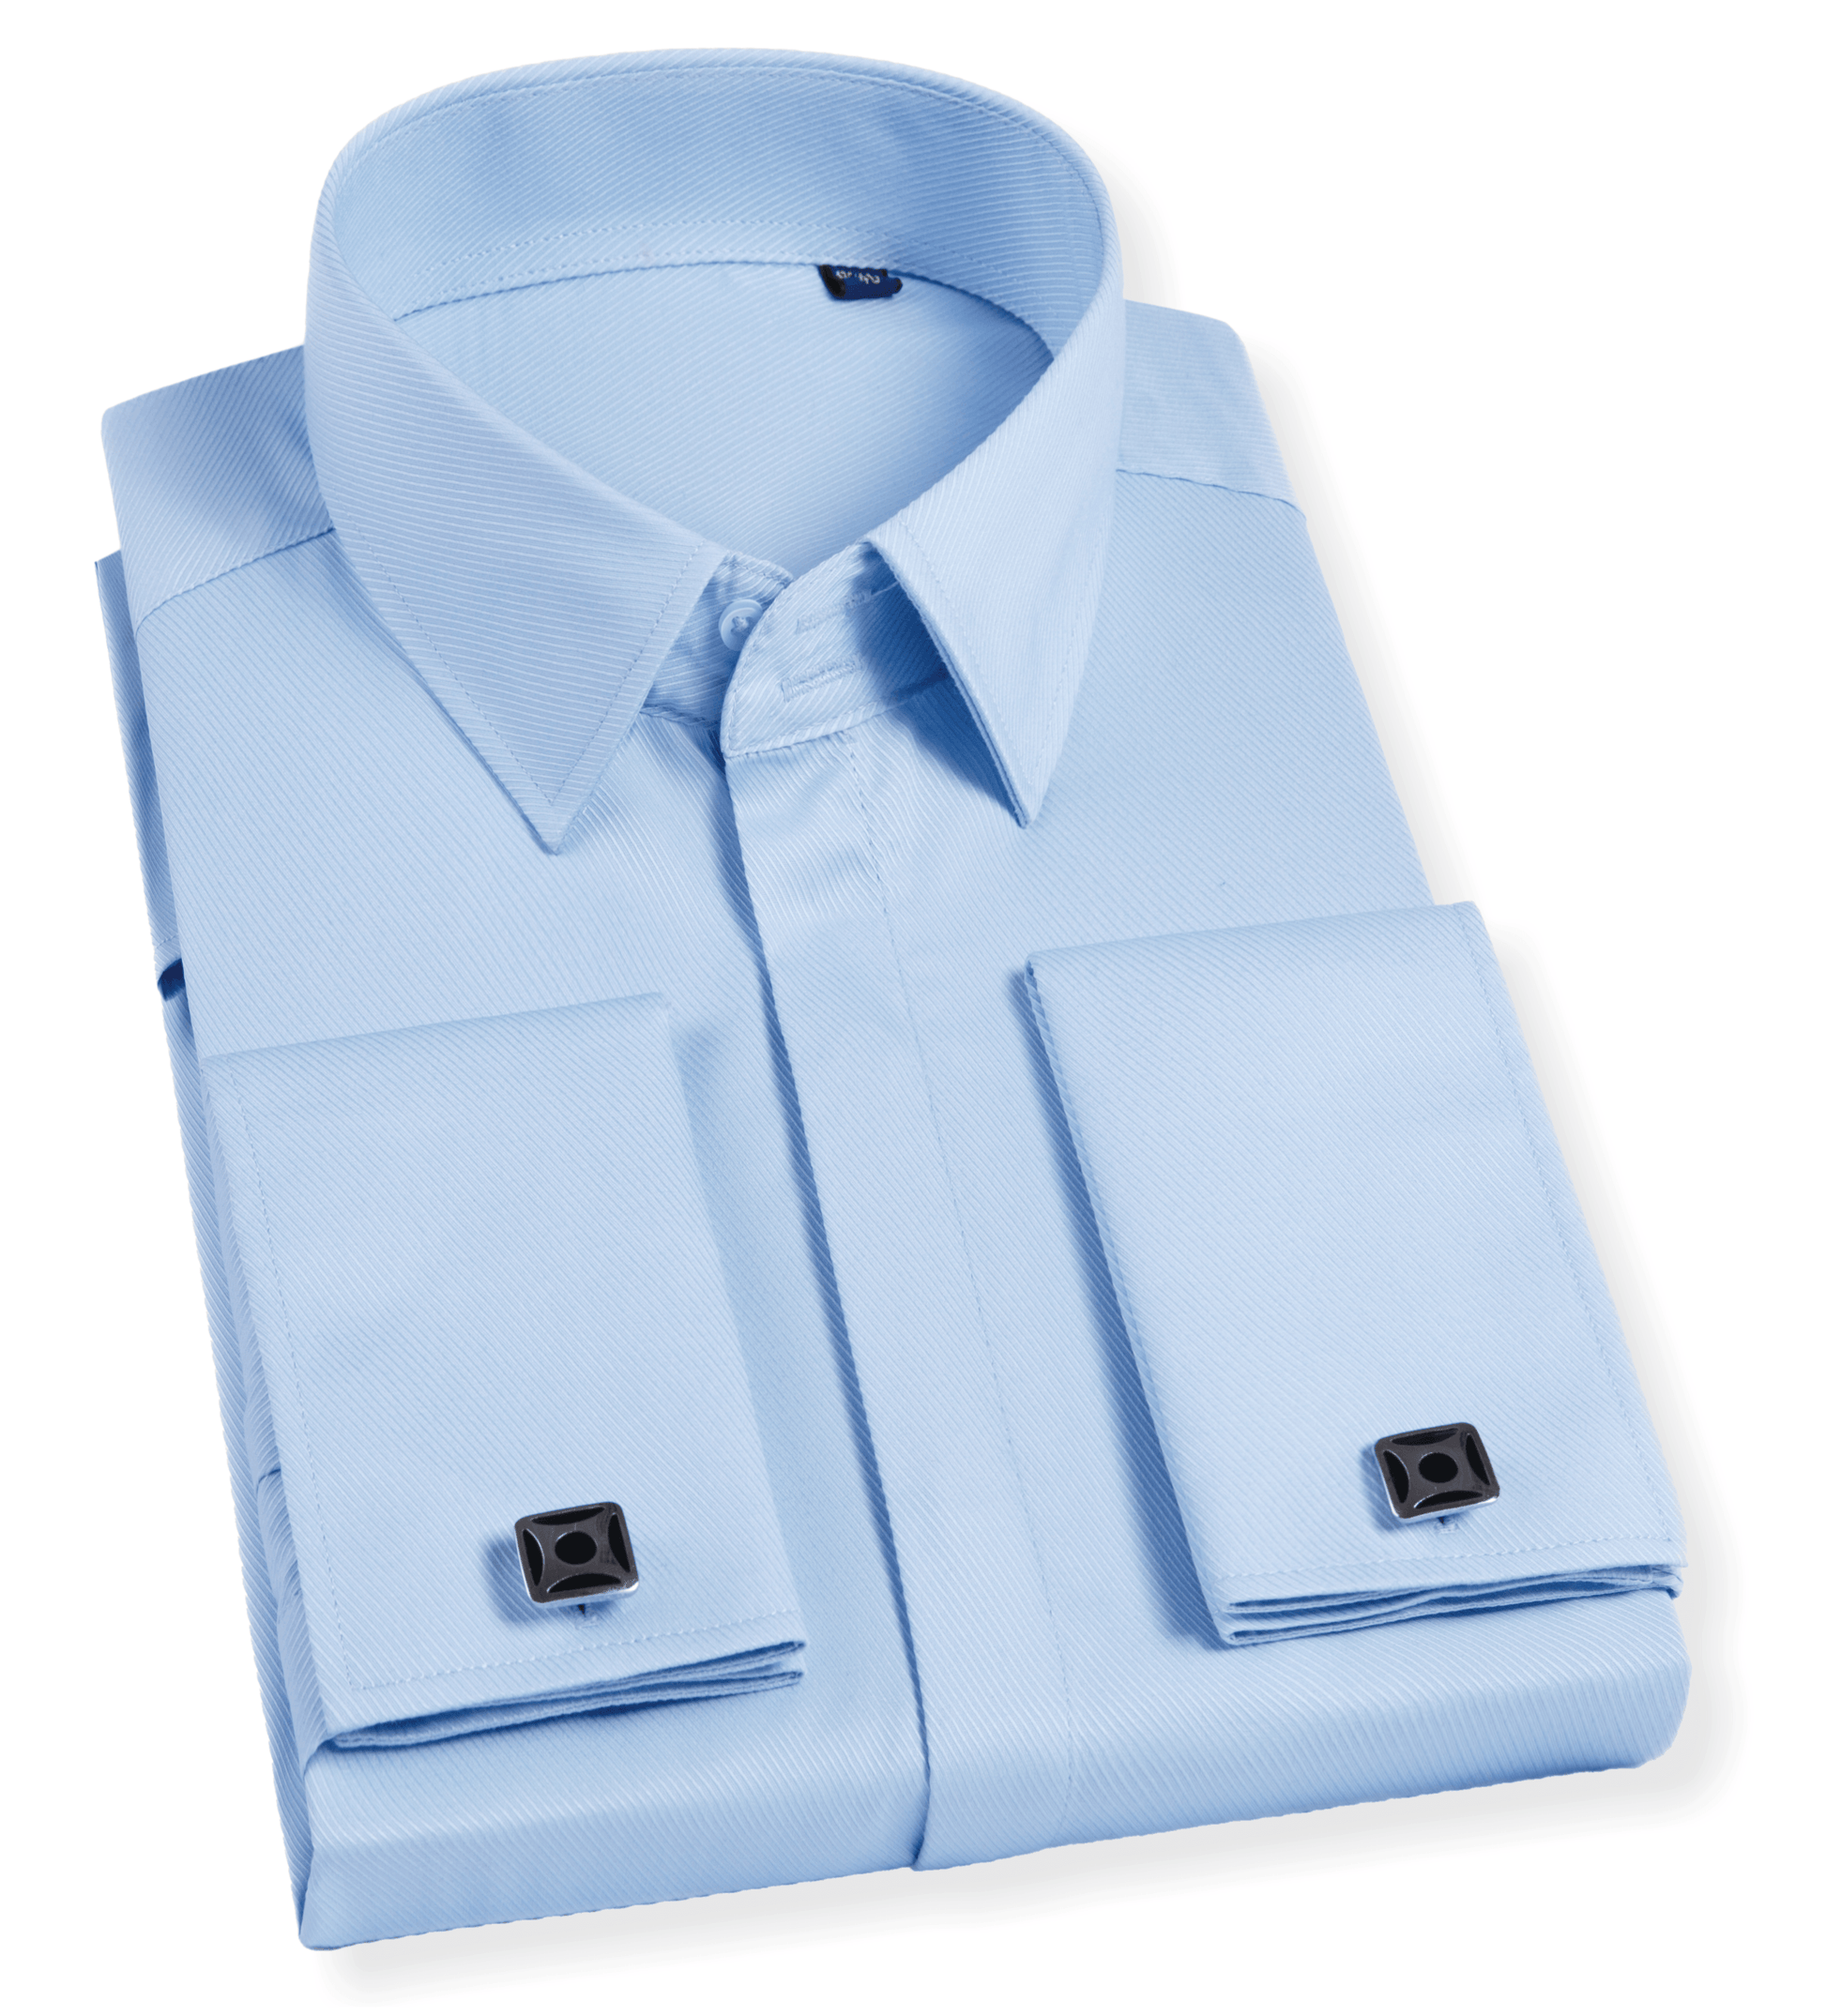 picture of blue doublecuff shirt with silver cufflinks